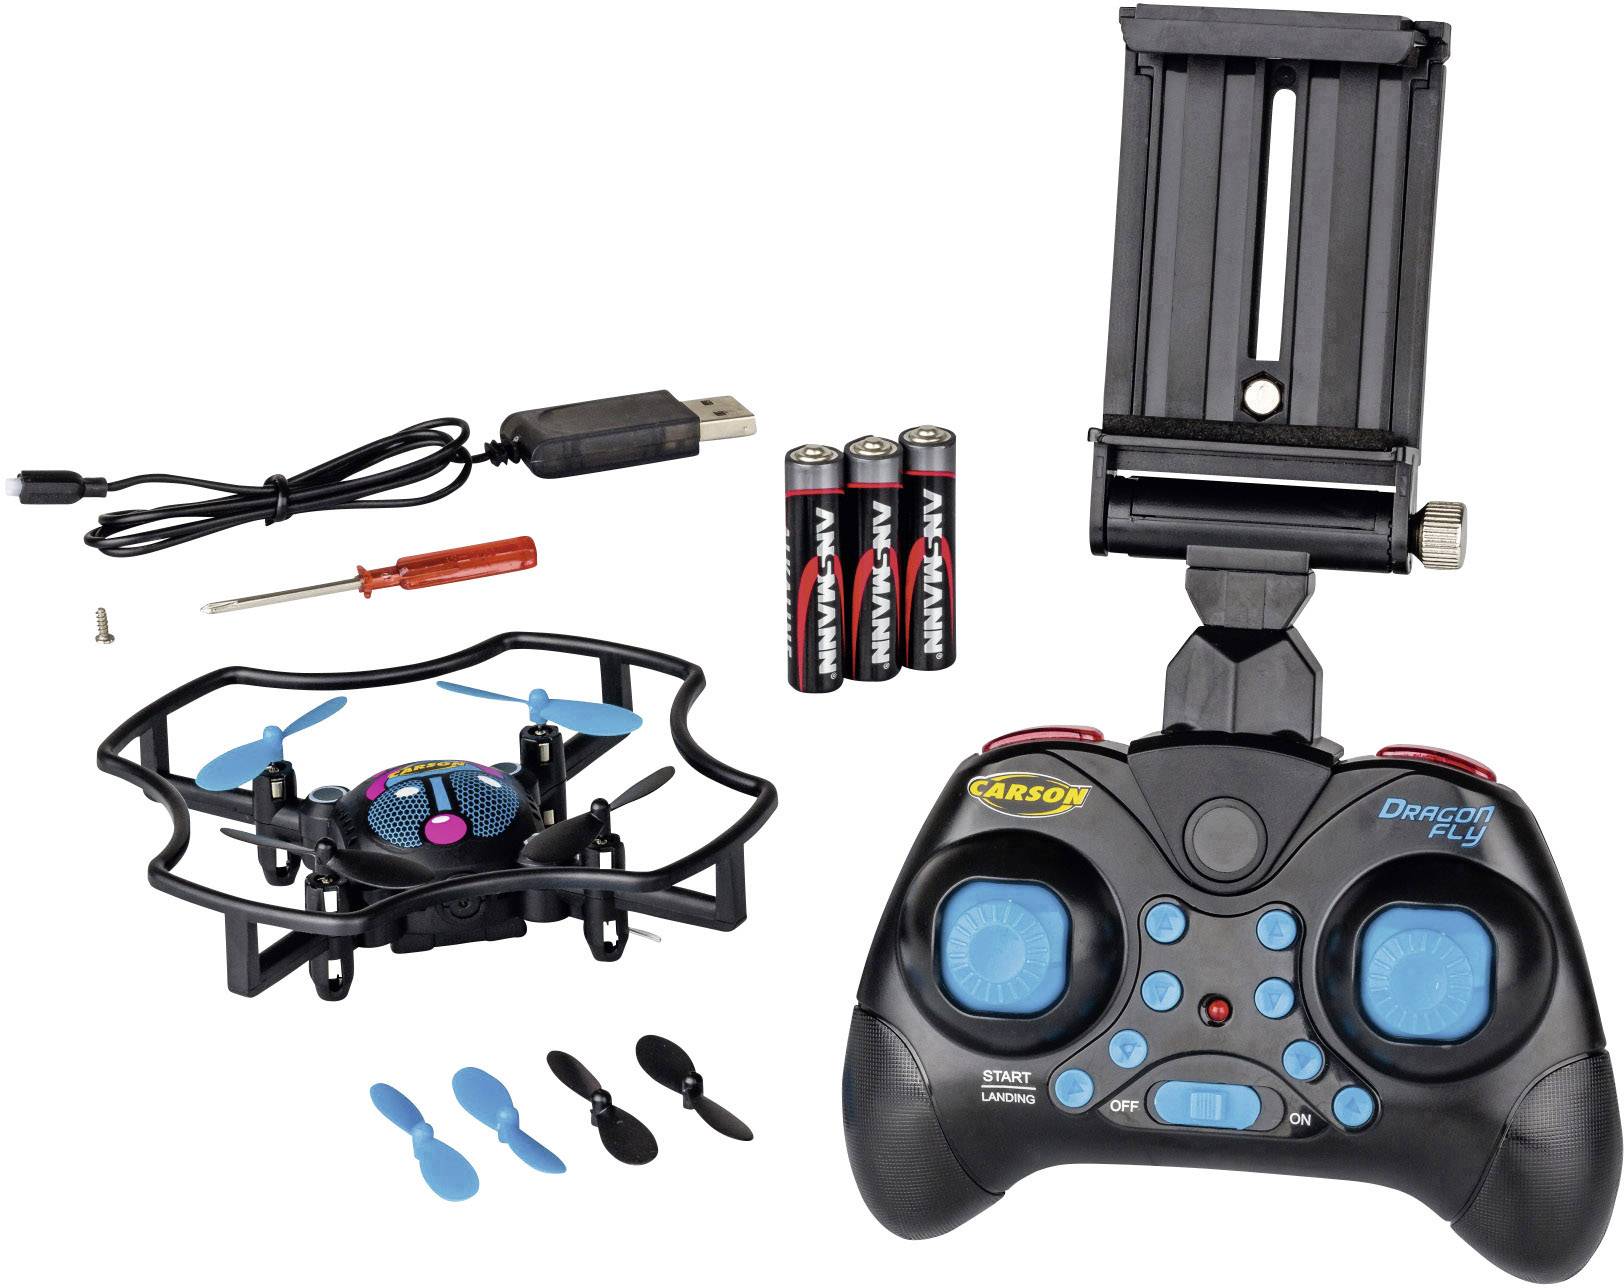 Fistone RC Drone WIFI FPV Quad-rotor 2.4G 6-Axis Gyro Altitude Hold Helicopters